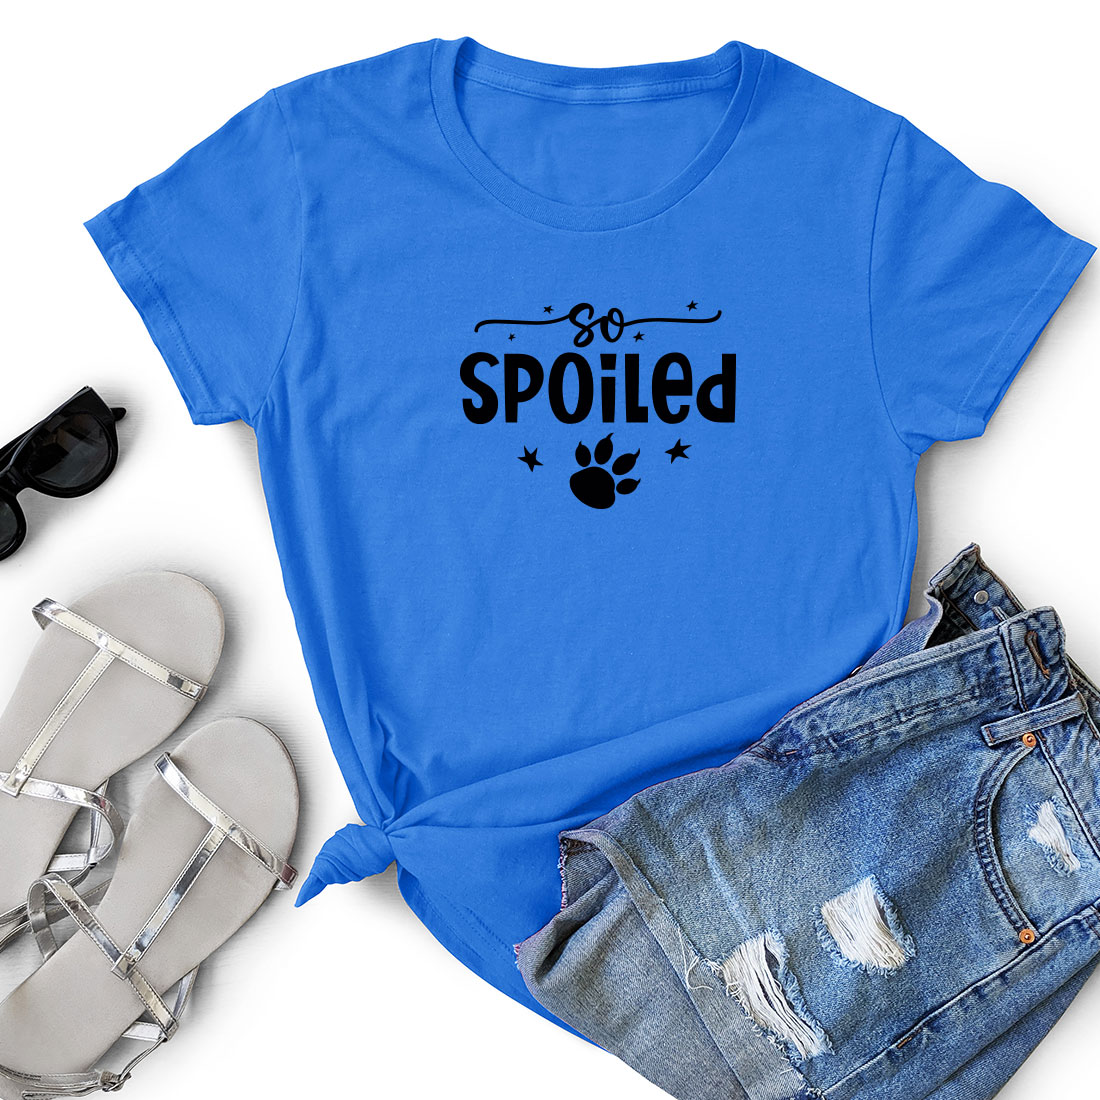 T - shirt that says spoiled with a dog's paw on it.